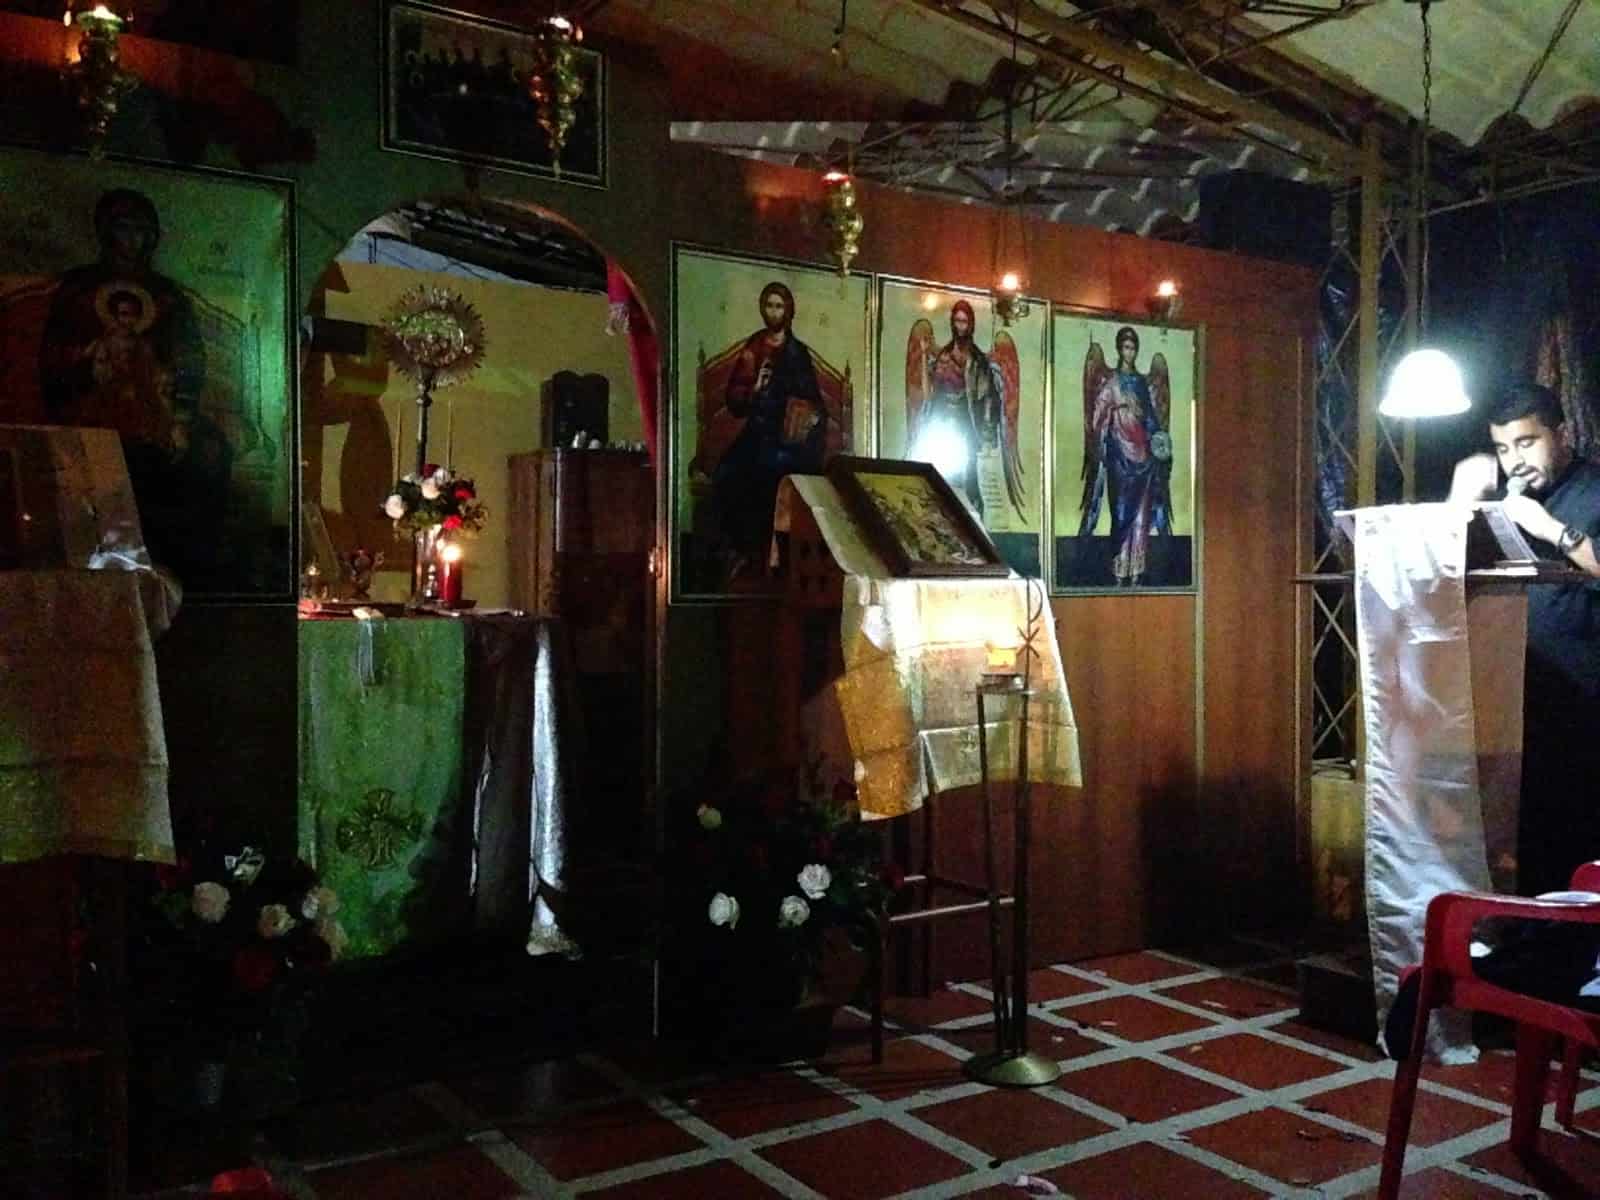 Anastasi service at the Greek Orthodox church in Pereira, Colombia